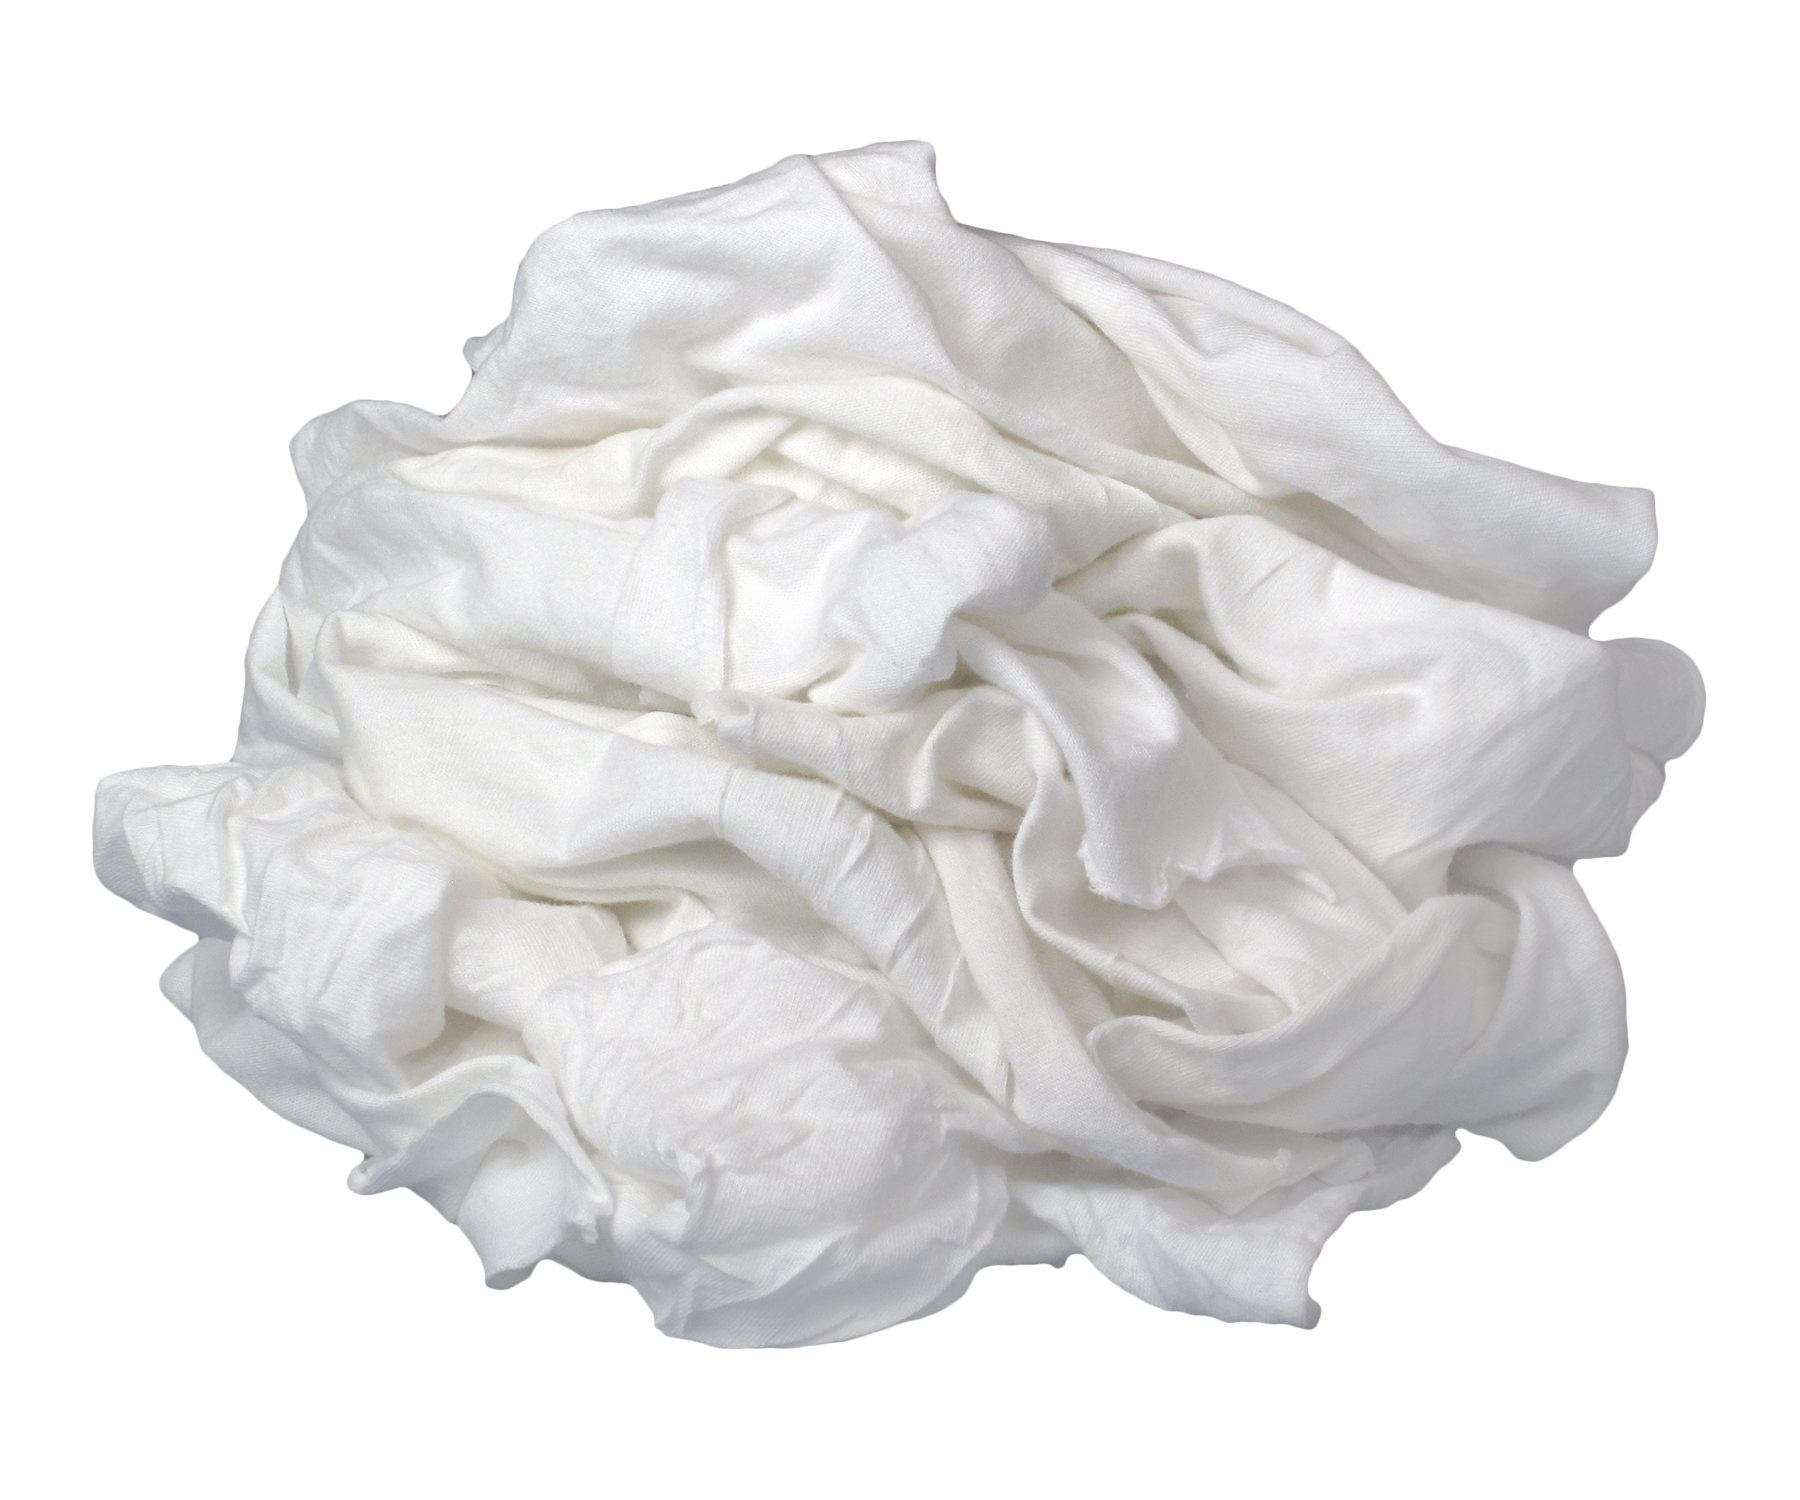 Off-white cloth cotton rags (new), New White Cotton Rags